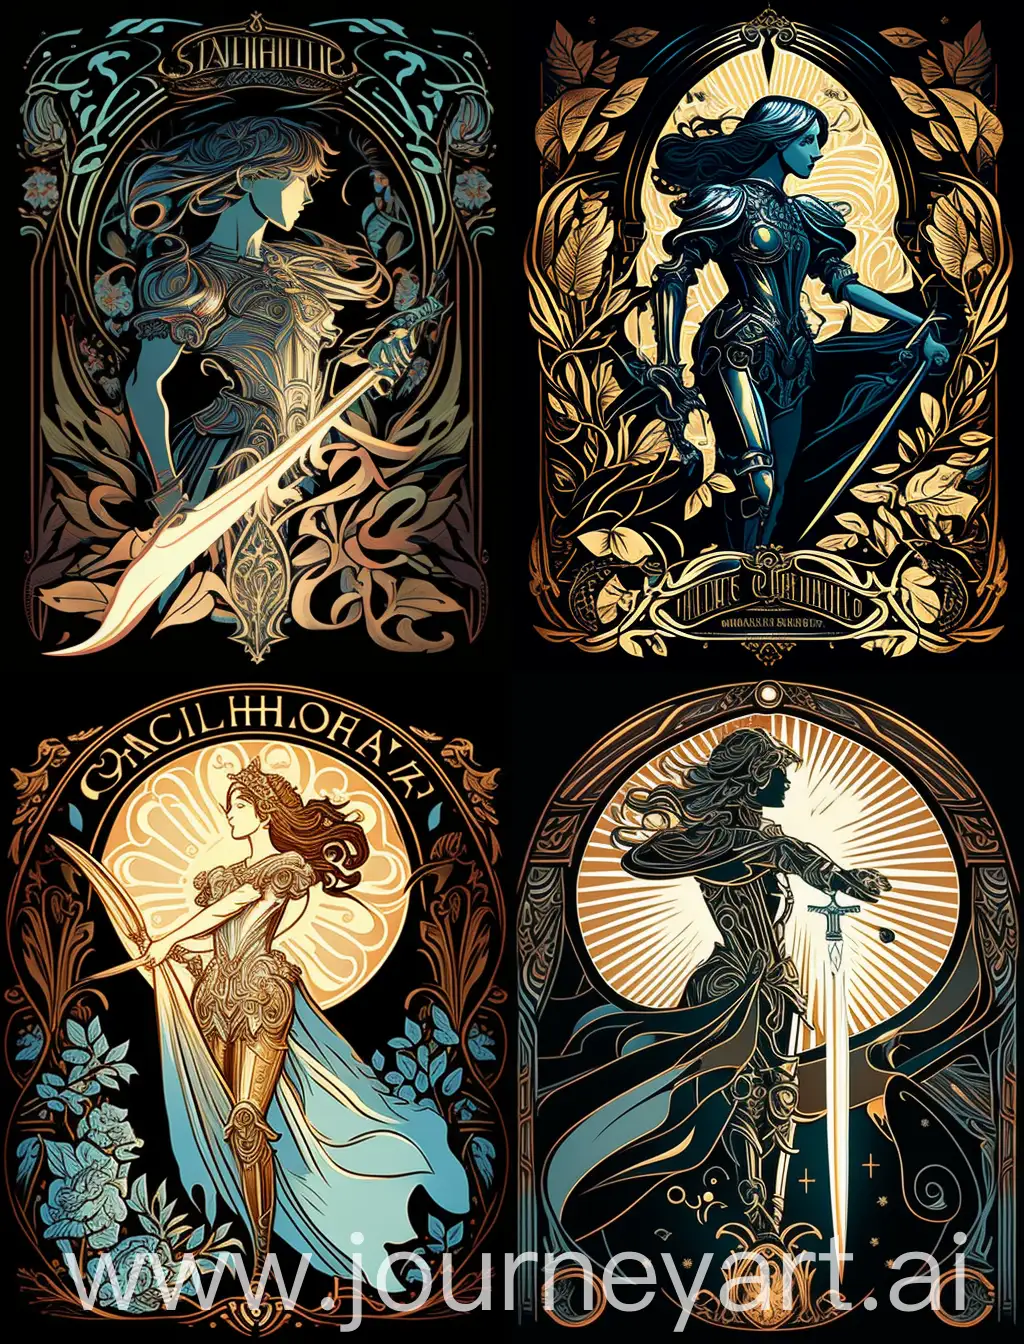 a knight, alphonso mucha, drawing in the style of art nouveau, wearing glowing steel armor, swords, rays of light, organic flowing lines, paper cut-outs, celestial, traditional, stenciled, simplified, hand drawn —ar 3:4 —stylize 250